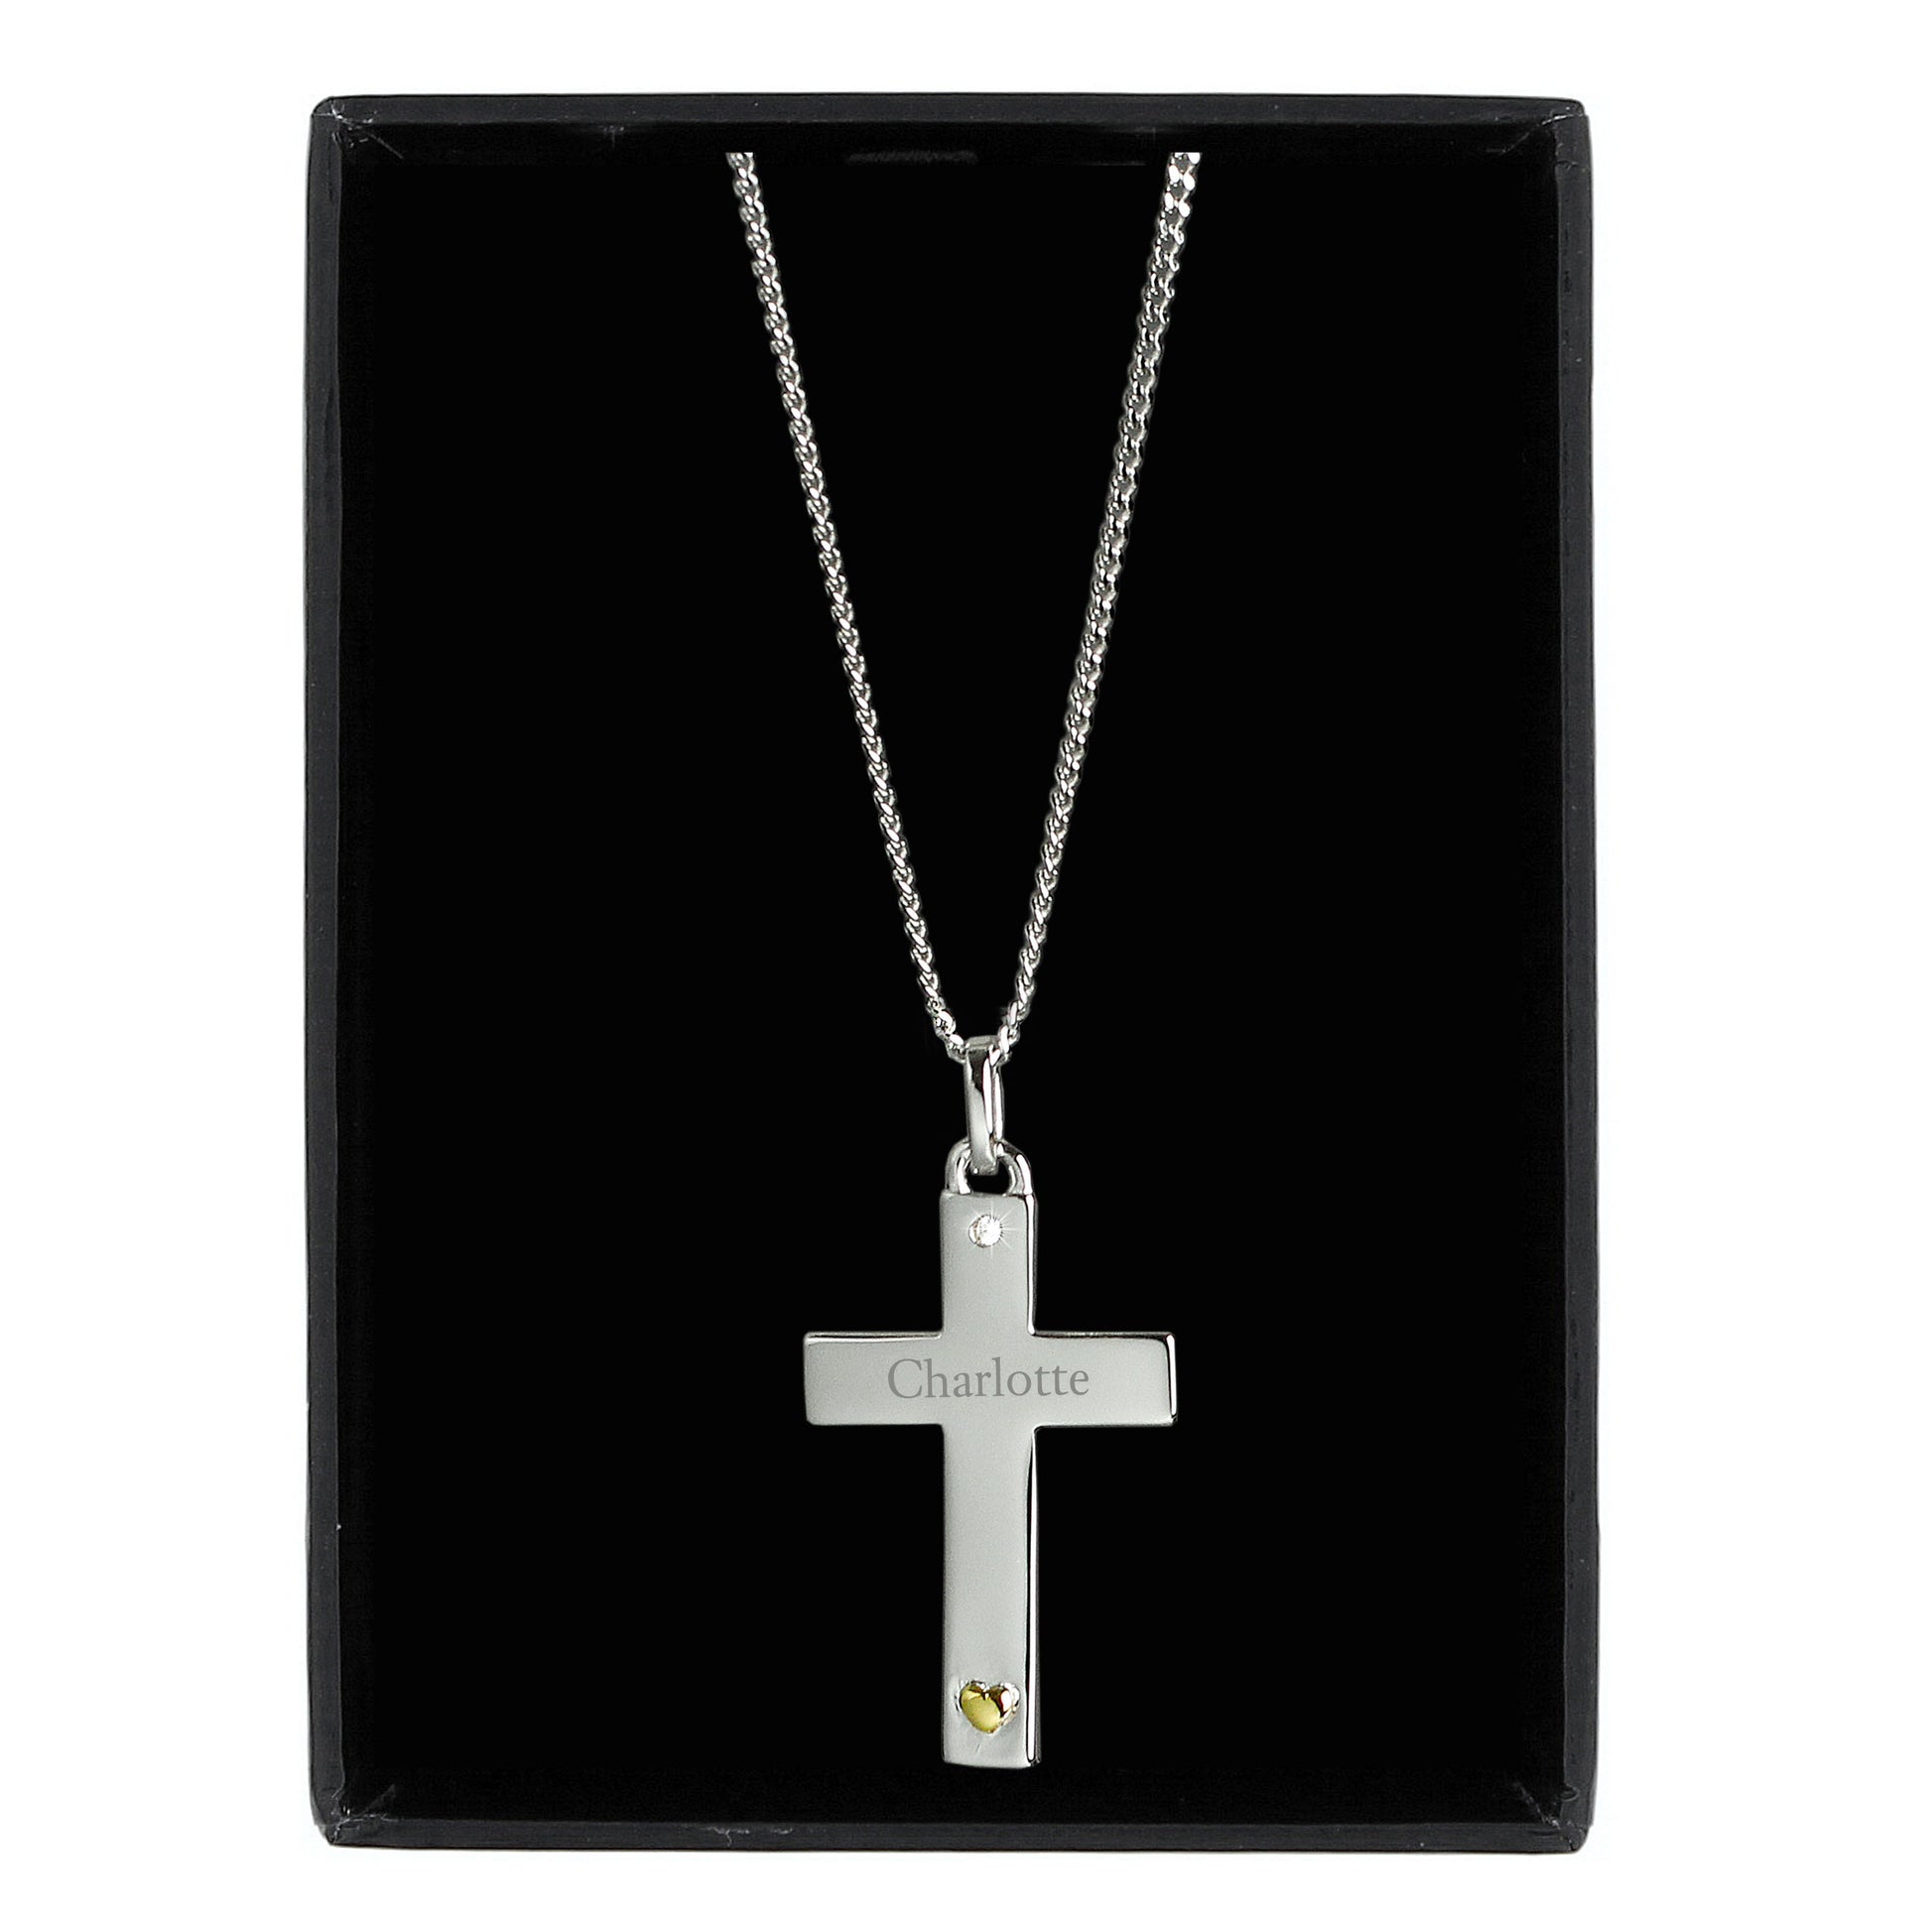 Sterling silver cross suspended from 18" sterling silver chain. The cross has a tiny zircona at the head and a gold plated heart at the foot of the cross. Personalised with a name of your choice. Shown in gift box